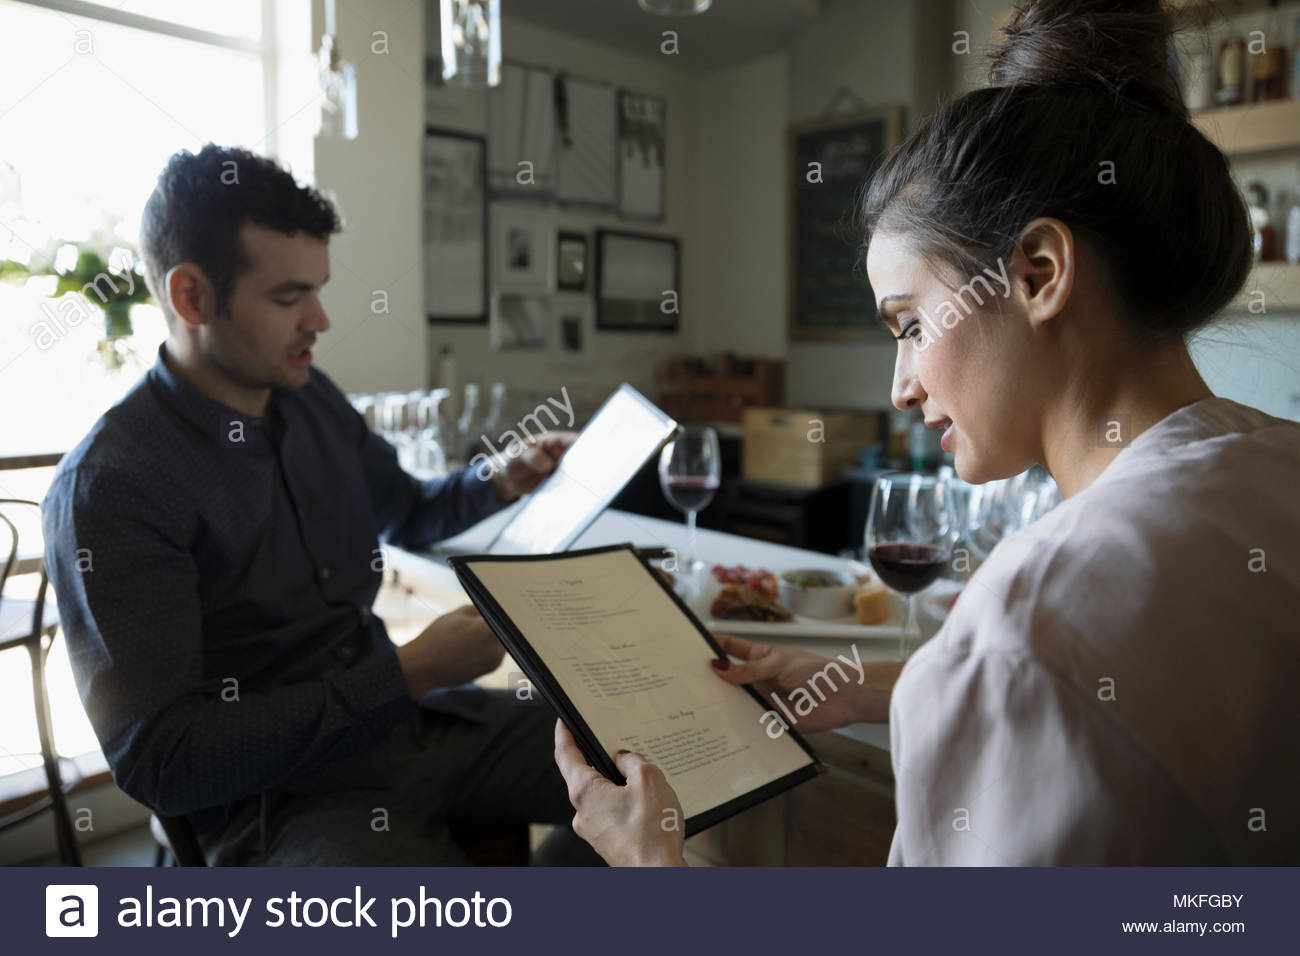 Young couple on date reading menu at bar Stock Photo